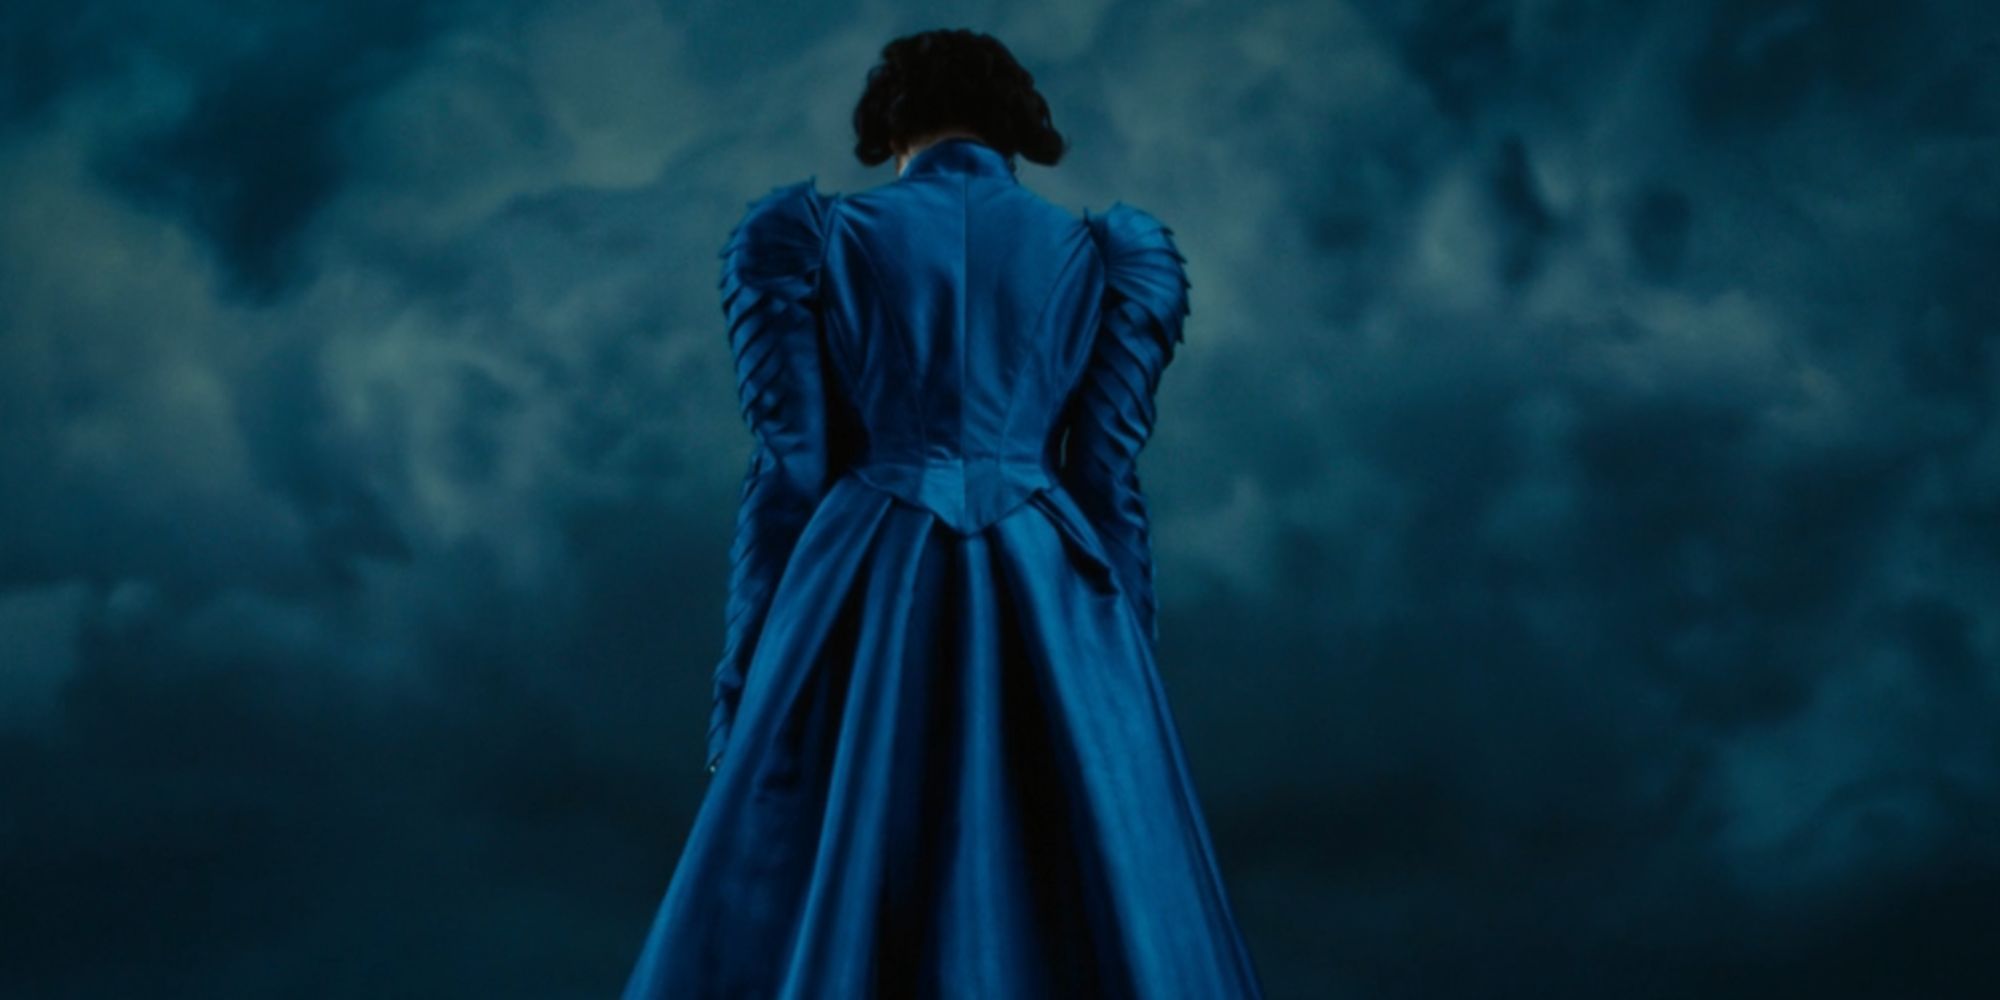 Emma Stone as Victoria Blessington with her back to the camera in a blue dress in Poor Things